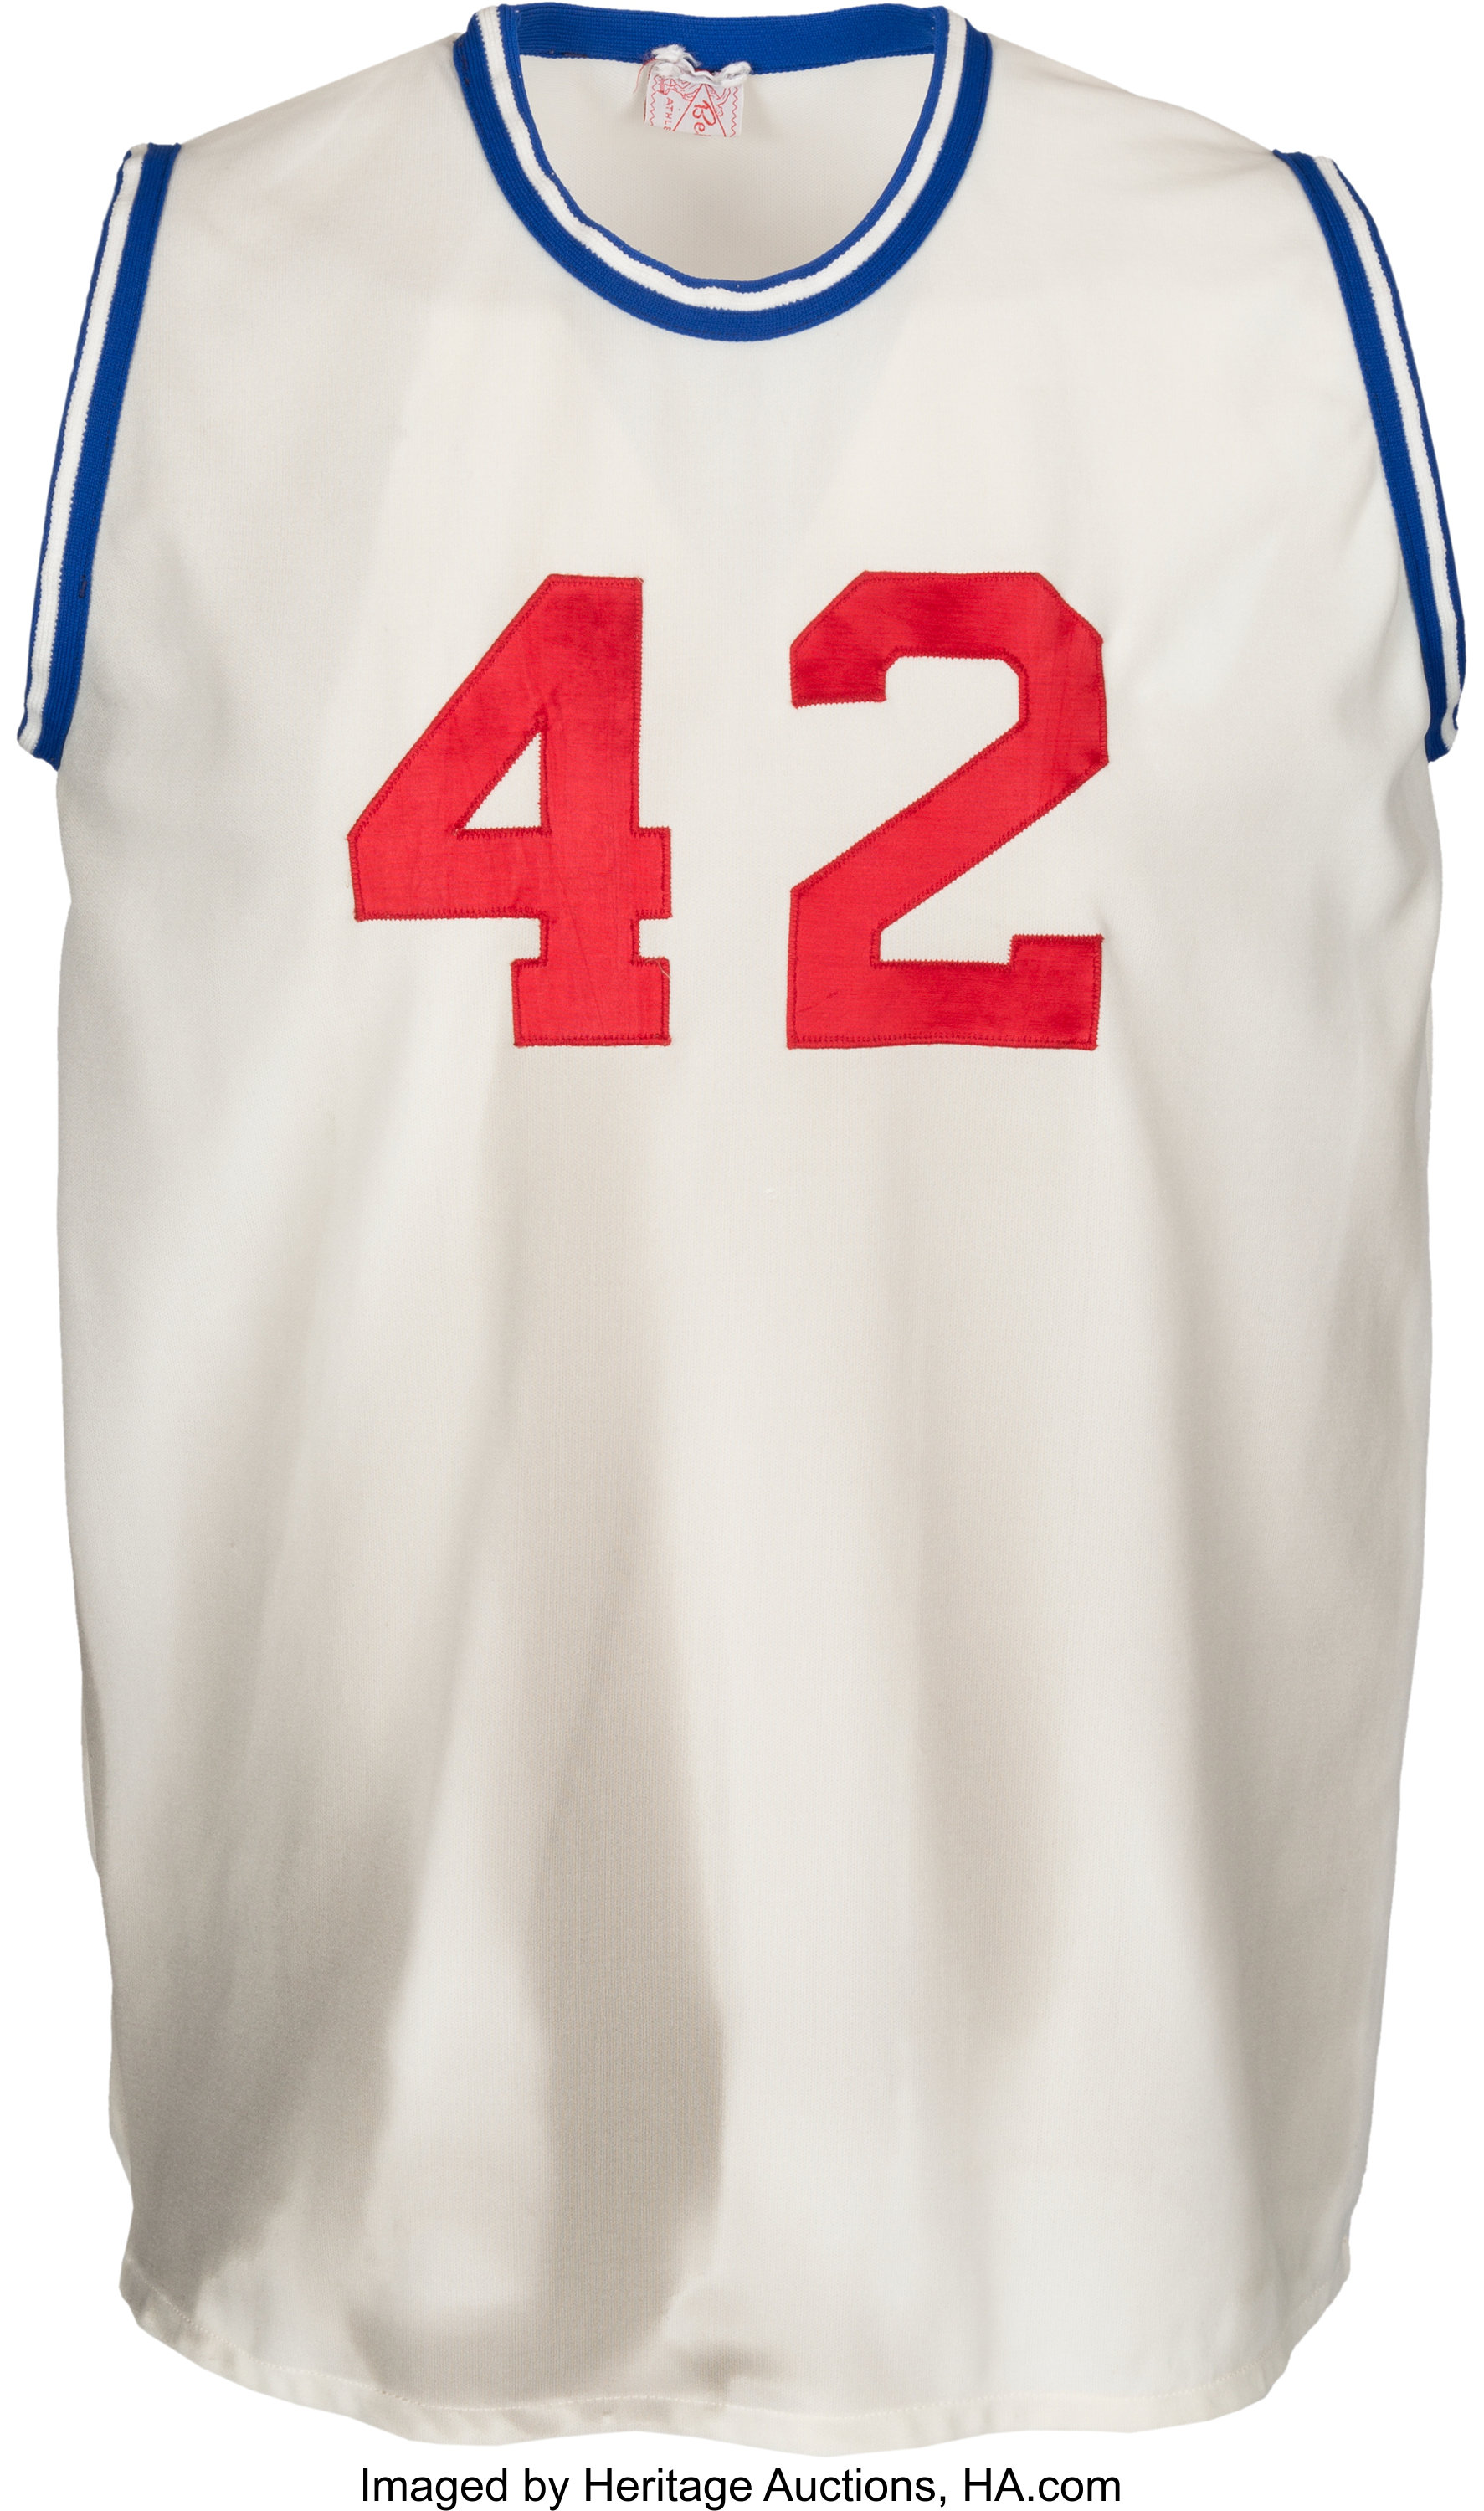 1971 Nate Thurmond NBA/ABA All-Star Game Worn Jersey, MEARS A8